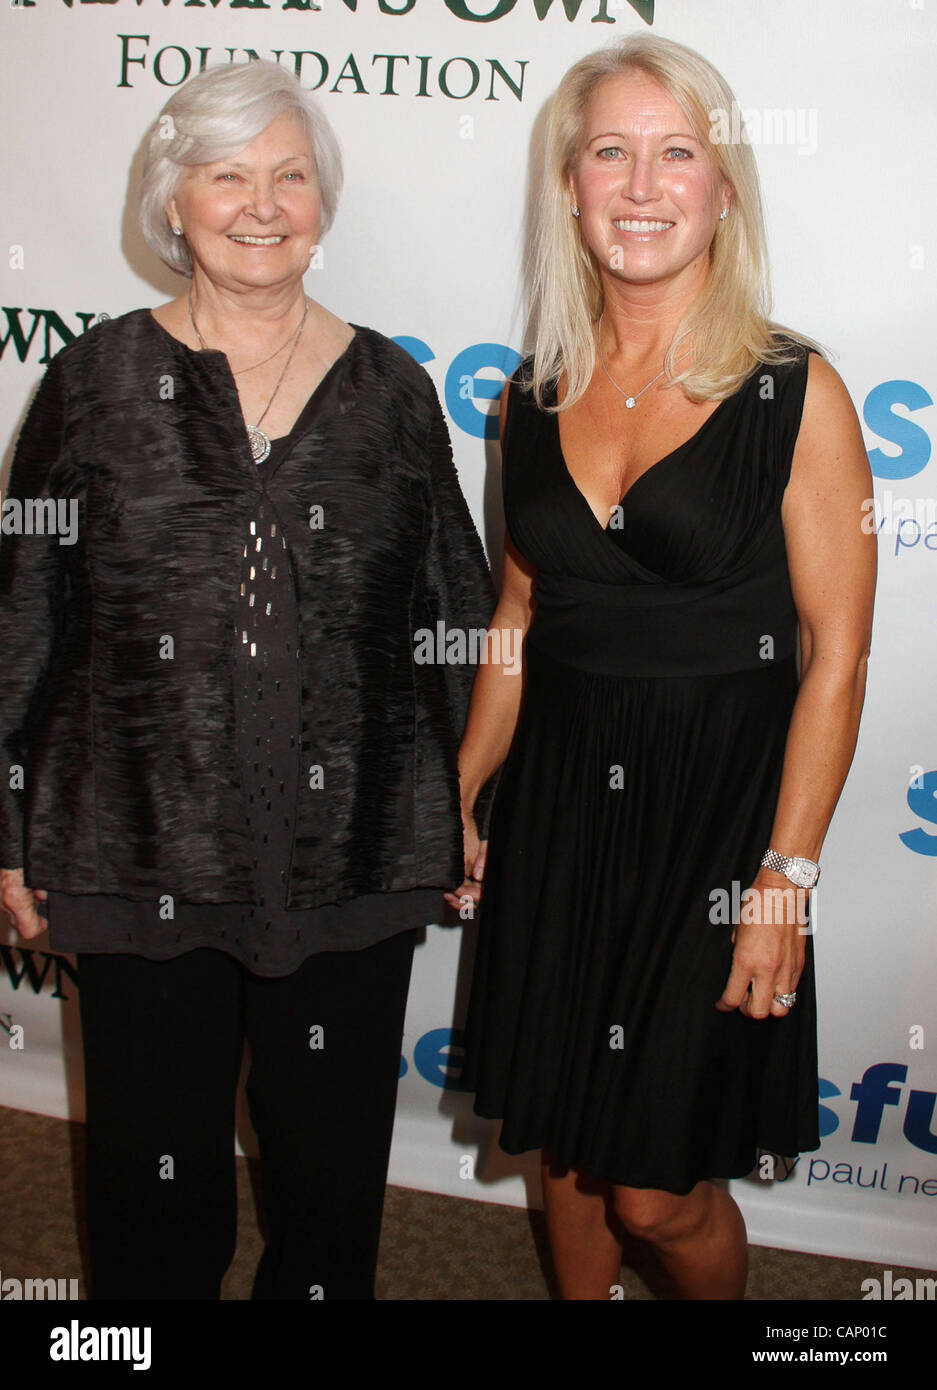 April 2, 2012 - Ny, New York, U.S. - Actress JOANNE WOODWARD and her daughter CLEA NEWMAN SODERLUND attend 'A Celebration of Paul Newman's Dream' to benefit Paul NewmanÃ•s Association of Hole in the Wall Camps held at Avery Fisher Hall at Lincoln Center. (Credit Image: © Nancy Kaszerman/ZUMAPRESS.co Stock Photo